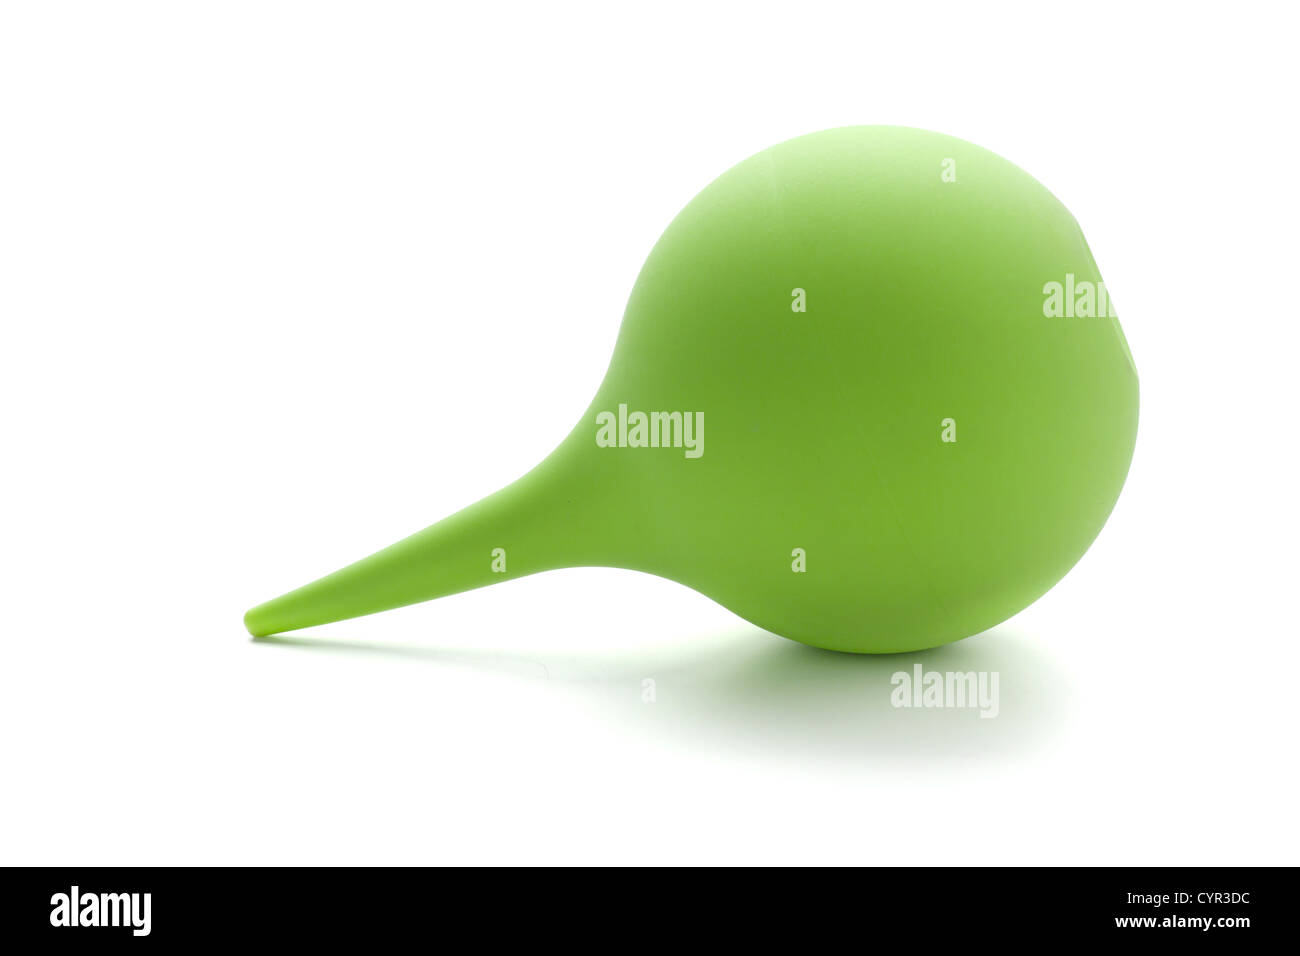 Green rubber pear (enema). Isolated on white Stock Photo